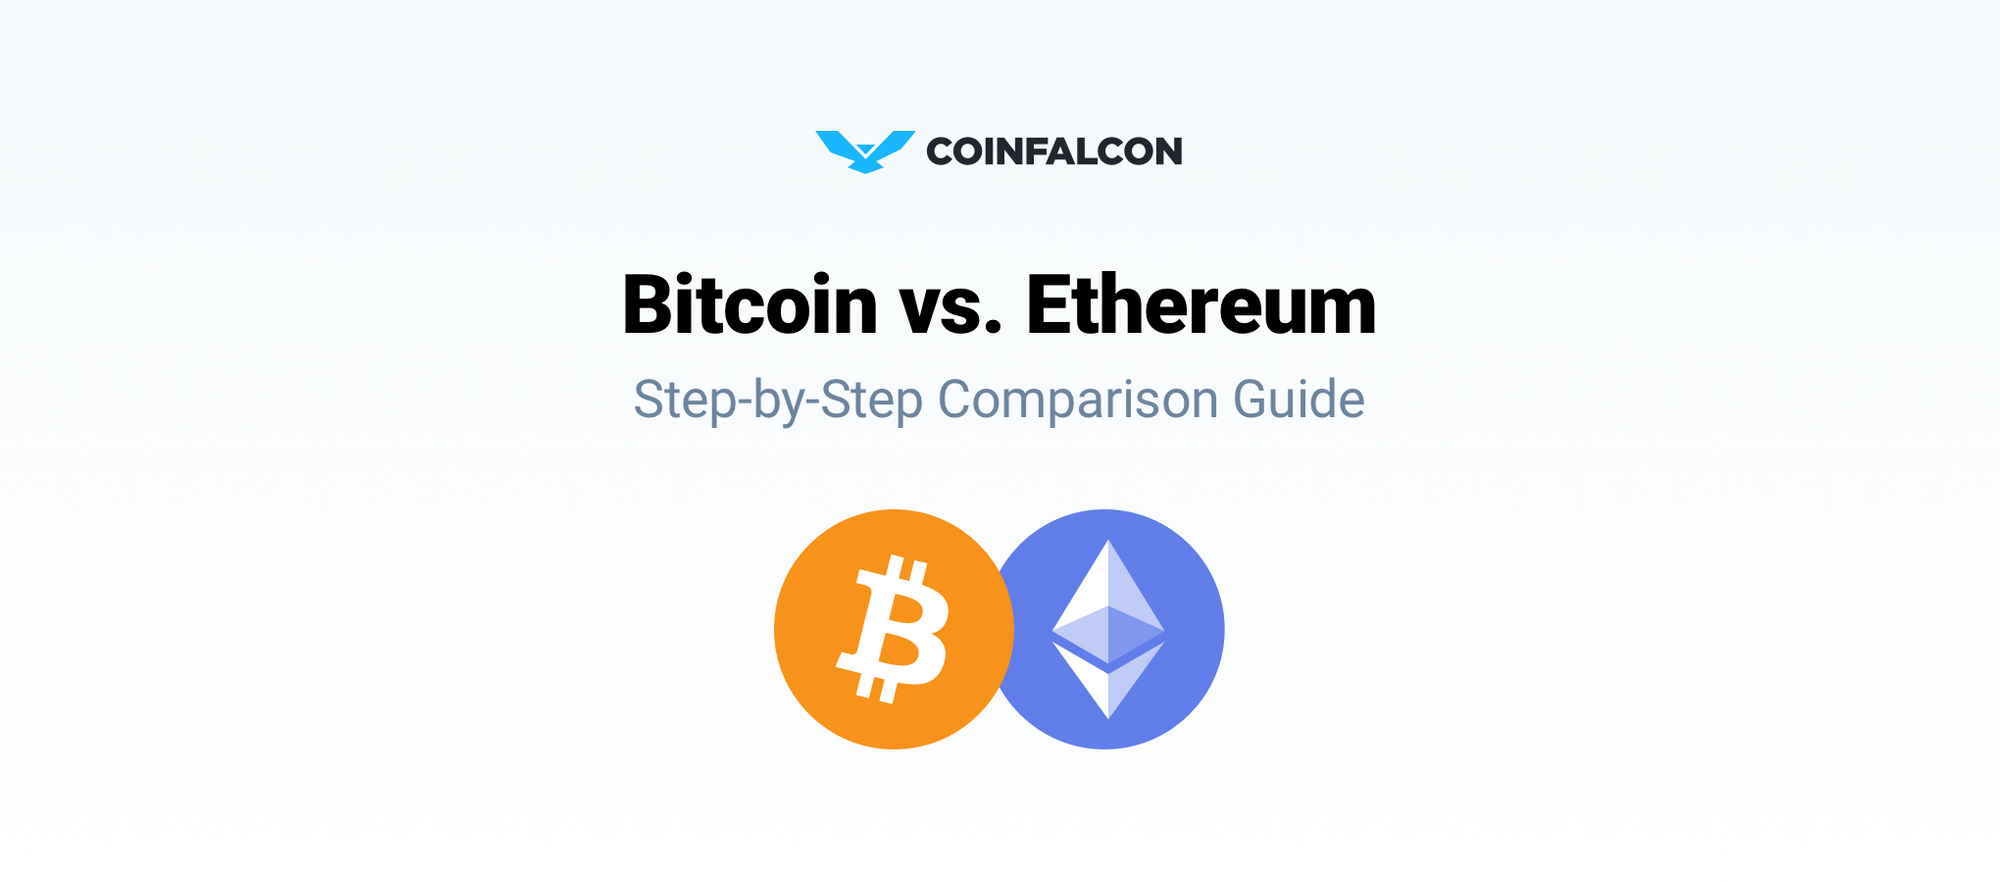 Step-by-Step Comparison Guide: Bitcoin vs. Ethereum